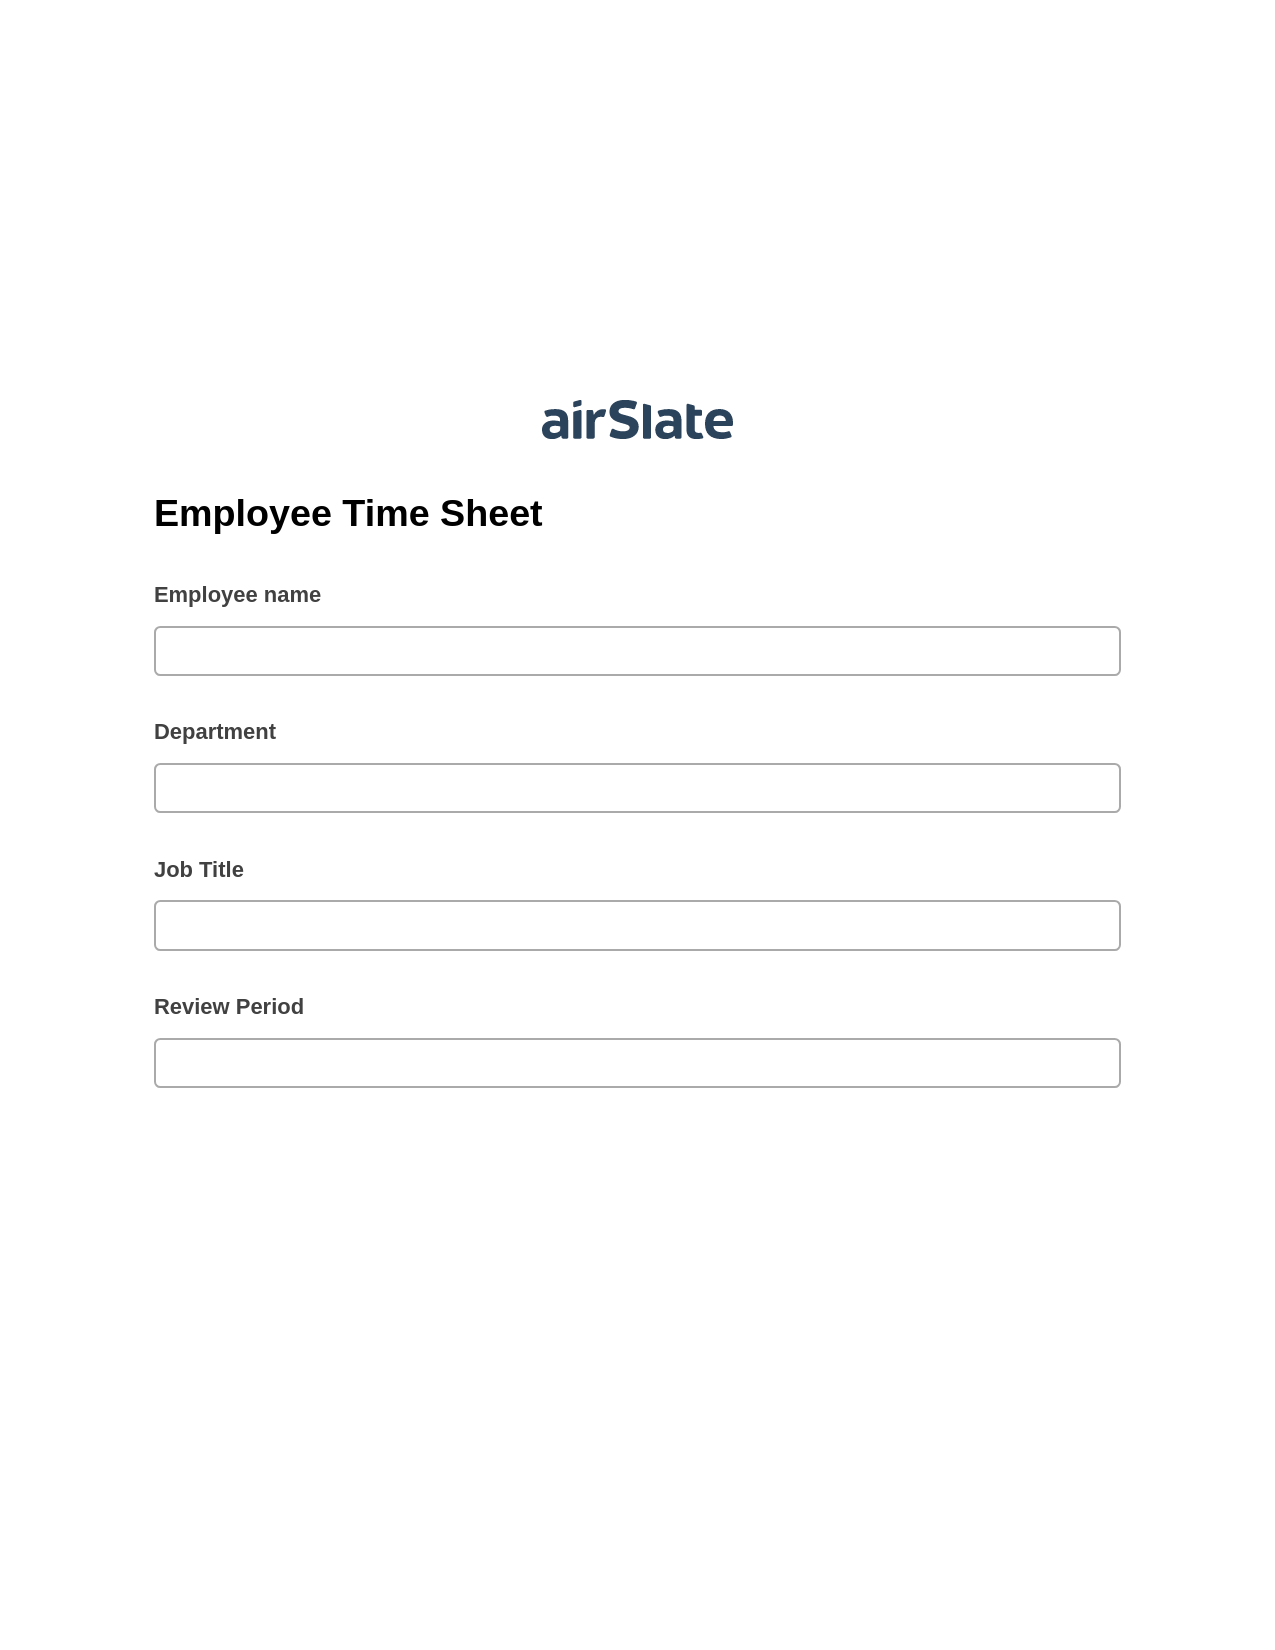 Multirole Employee Time Sheet Pre-fill from Google Sheets Bot, Update MS Dynamics 365 Record Bot, Export to WebMerge Bot